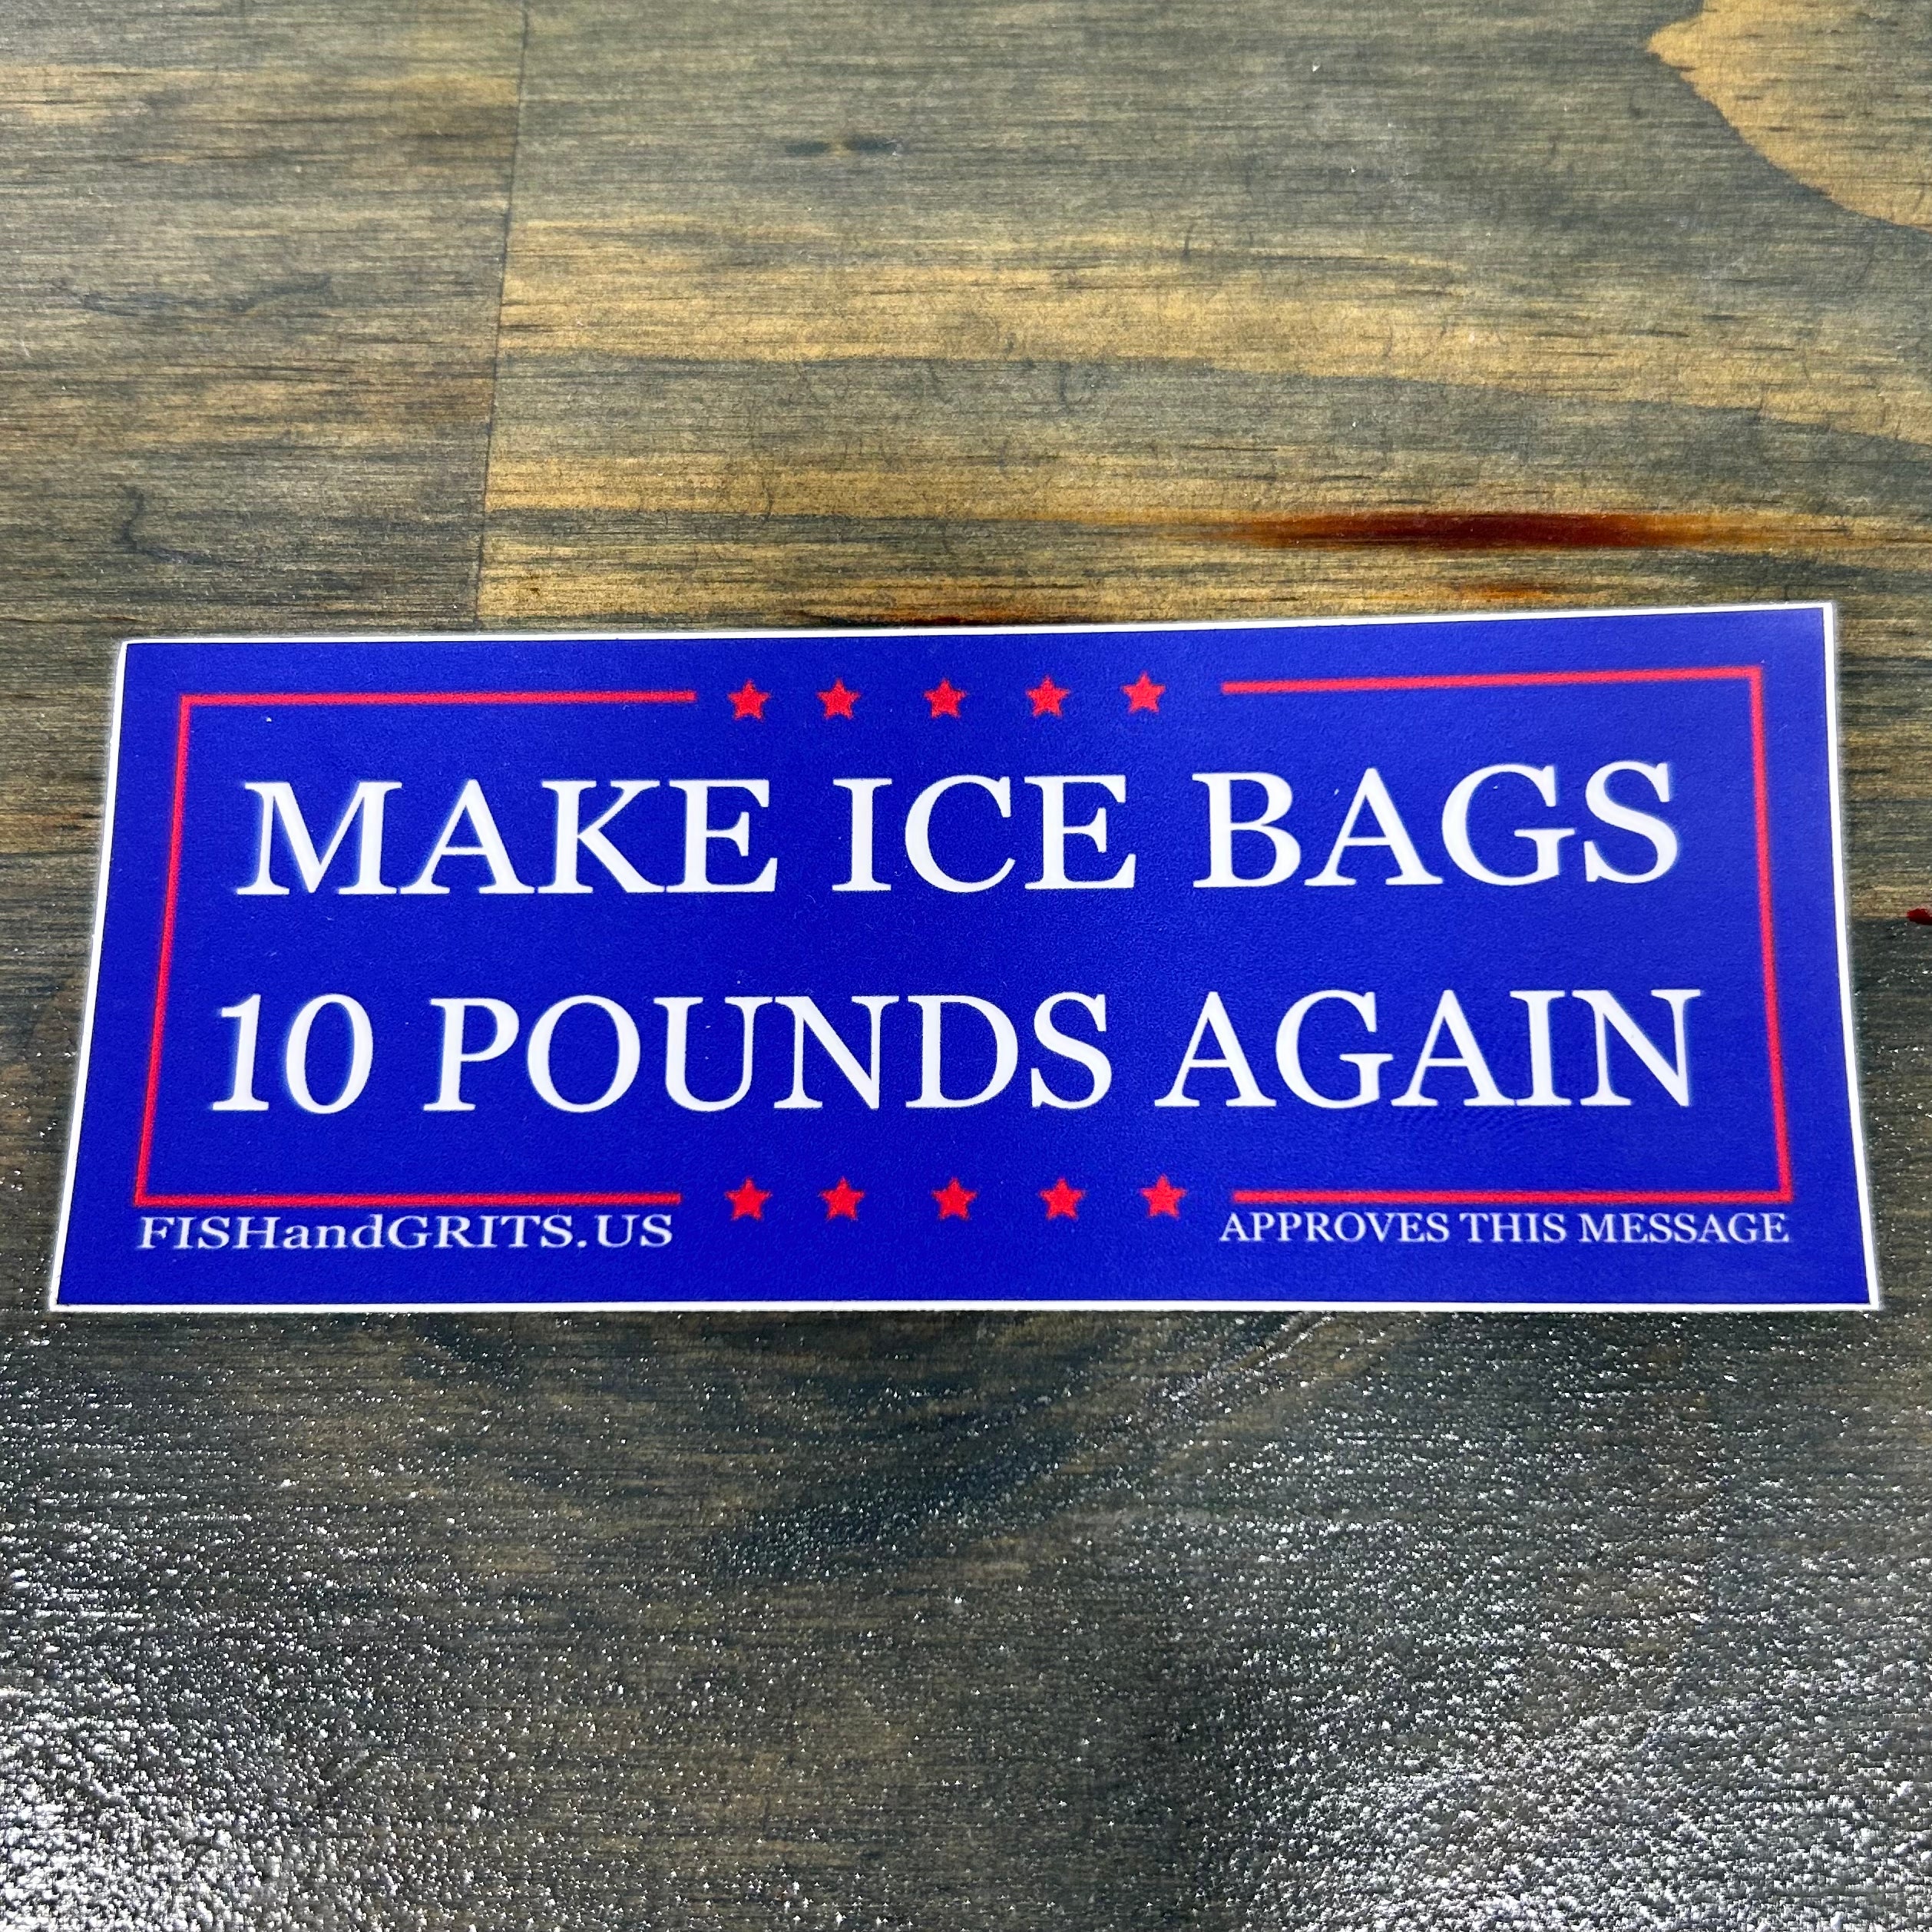 Fish and Grits “ice bags” sticker